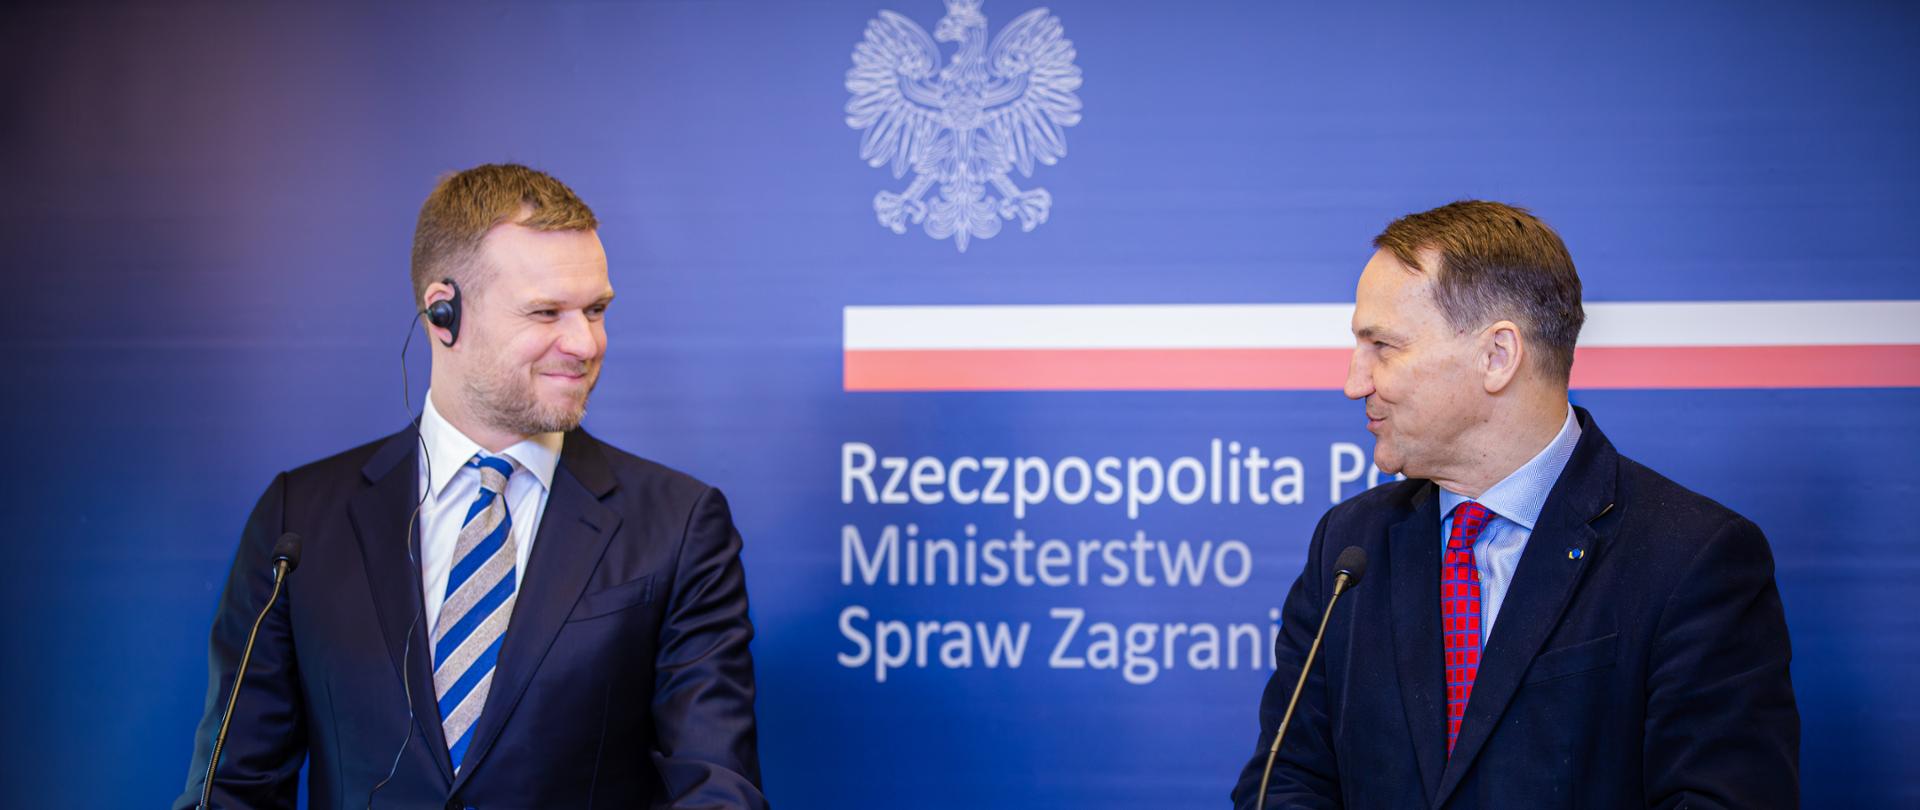 Meeting of foreign ministers of Poland and Lithuania